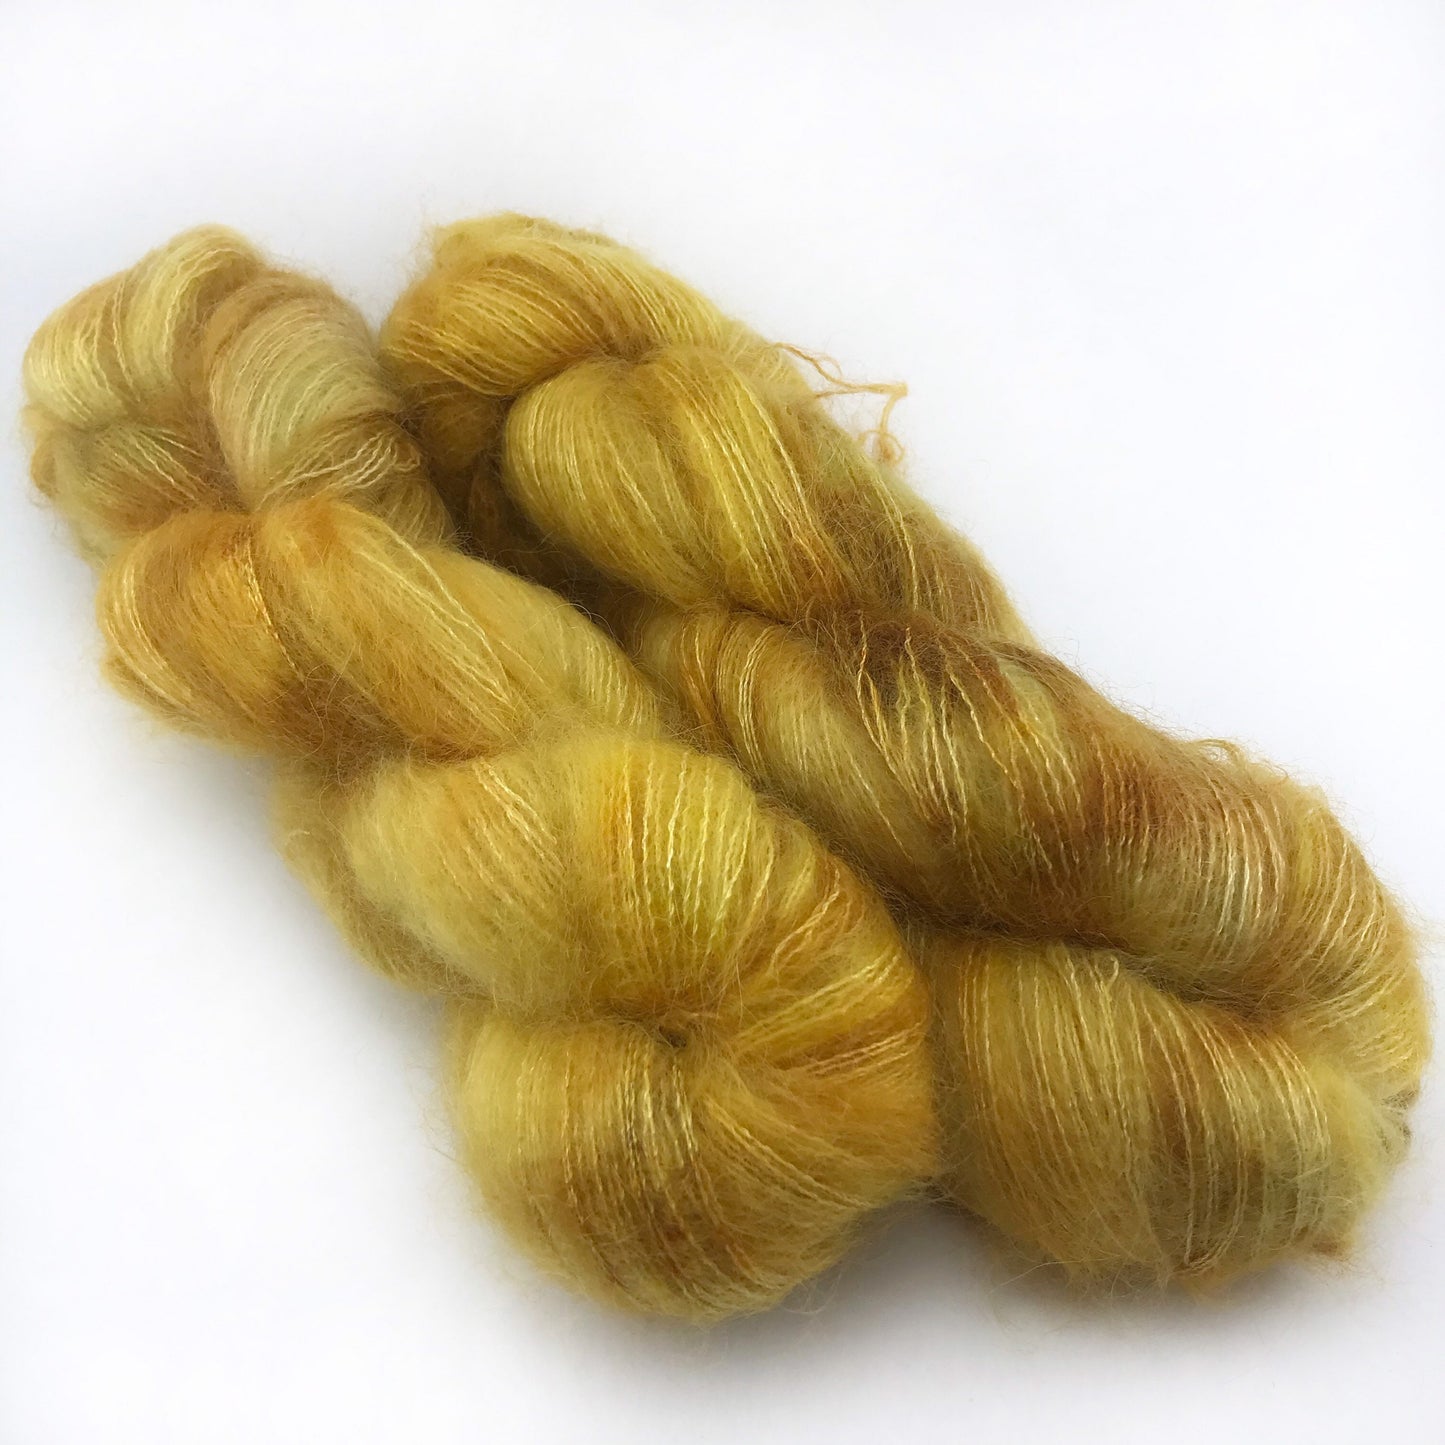 SUNFLOWER - Yellow Brown Speckled Lace Weight Mohair